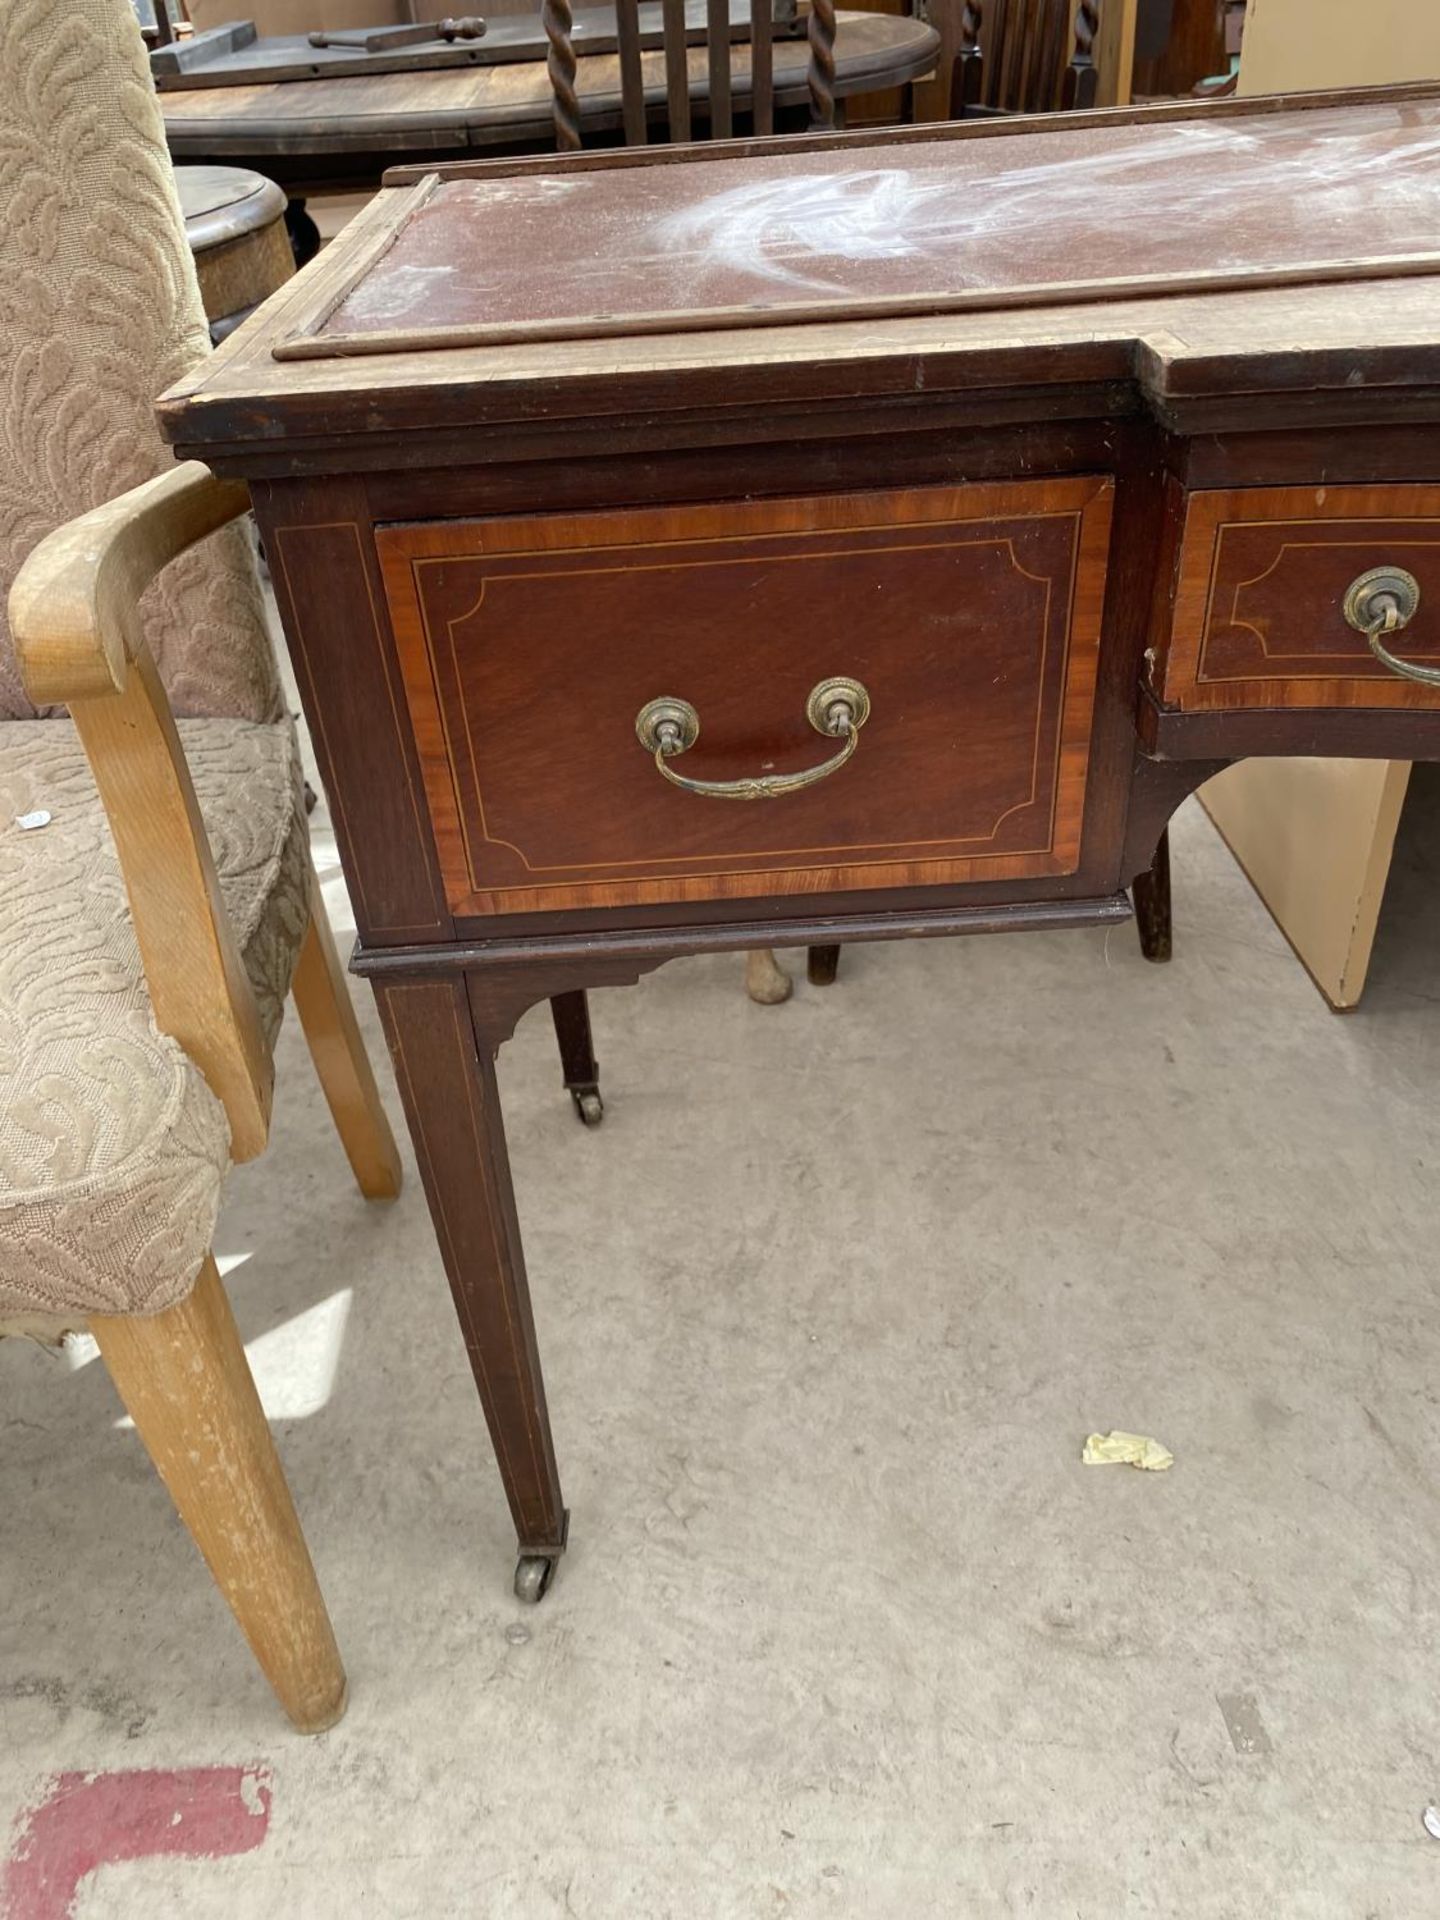 AN EDWARDIAN AND MAHOGANY INLAY DESK ON TAPERED LEGS AND SPADE FEET - Image 4 of 5